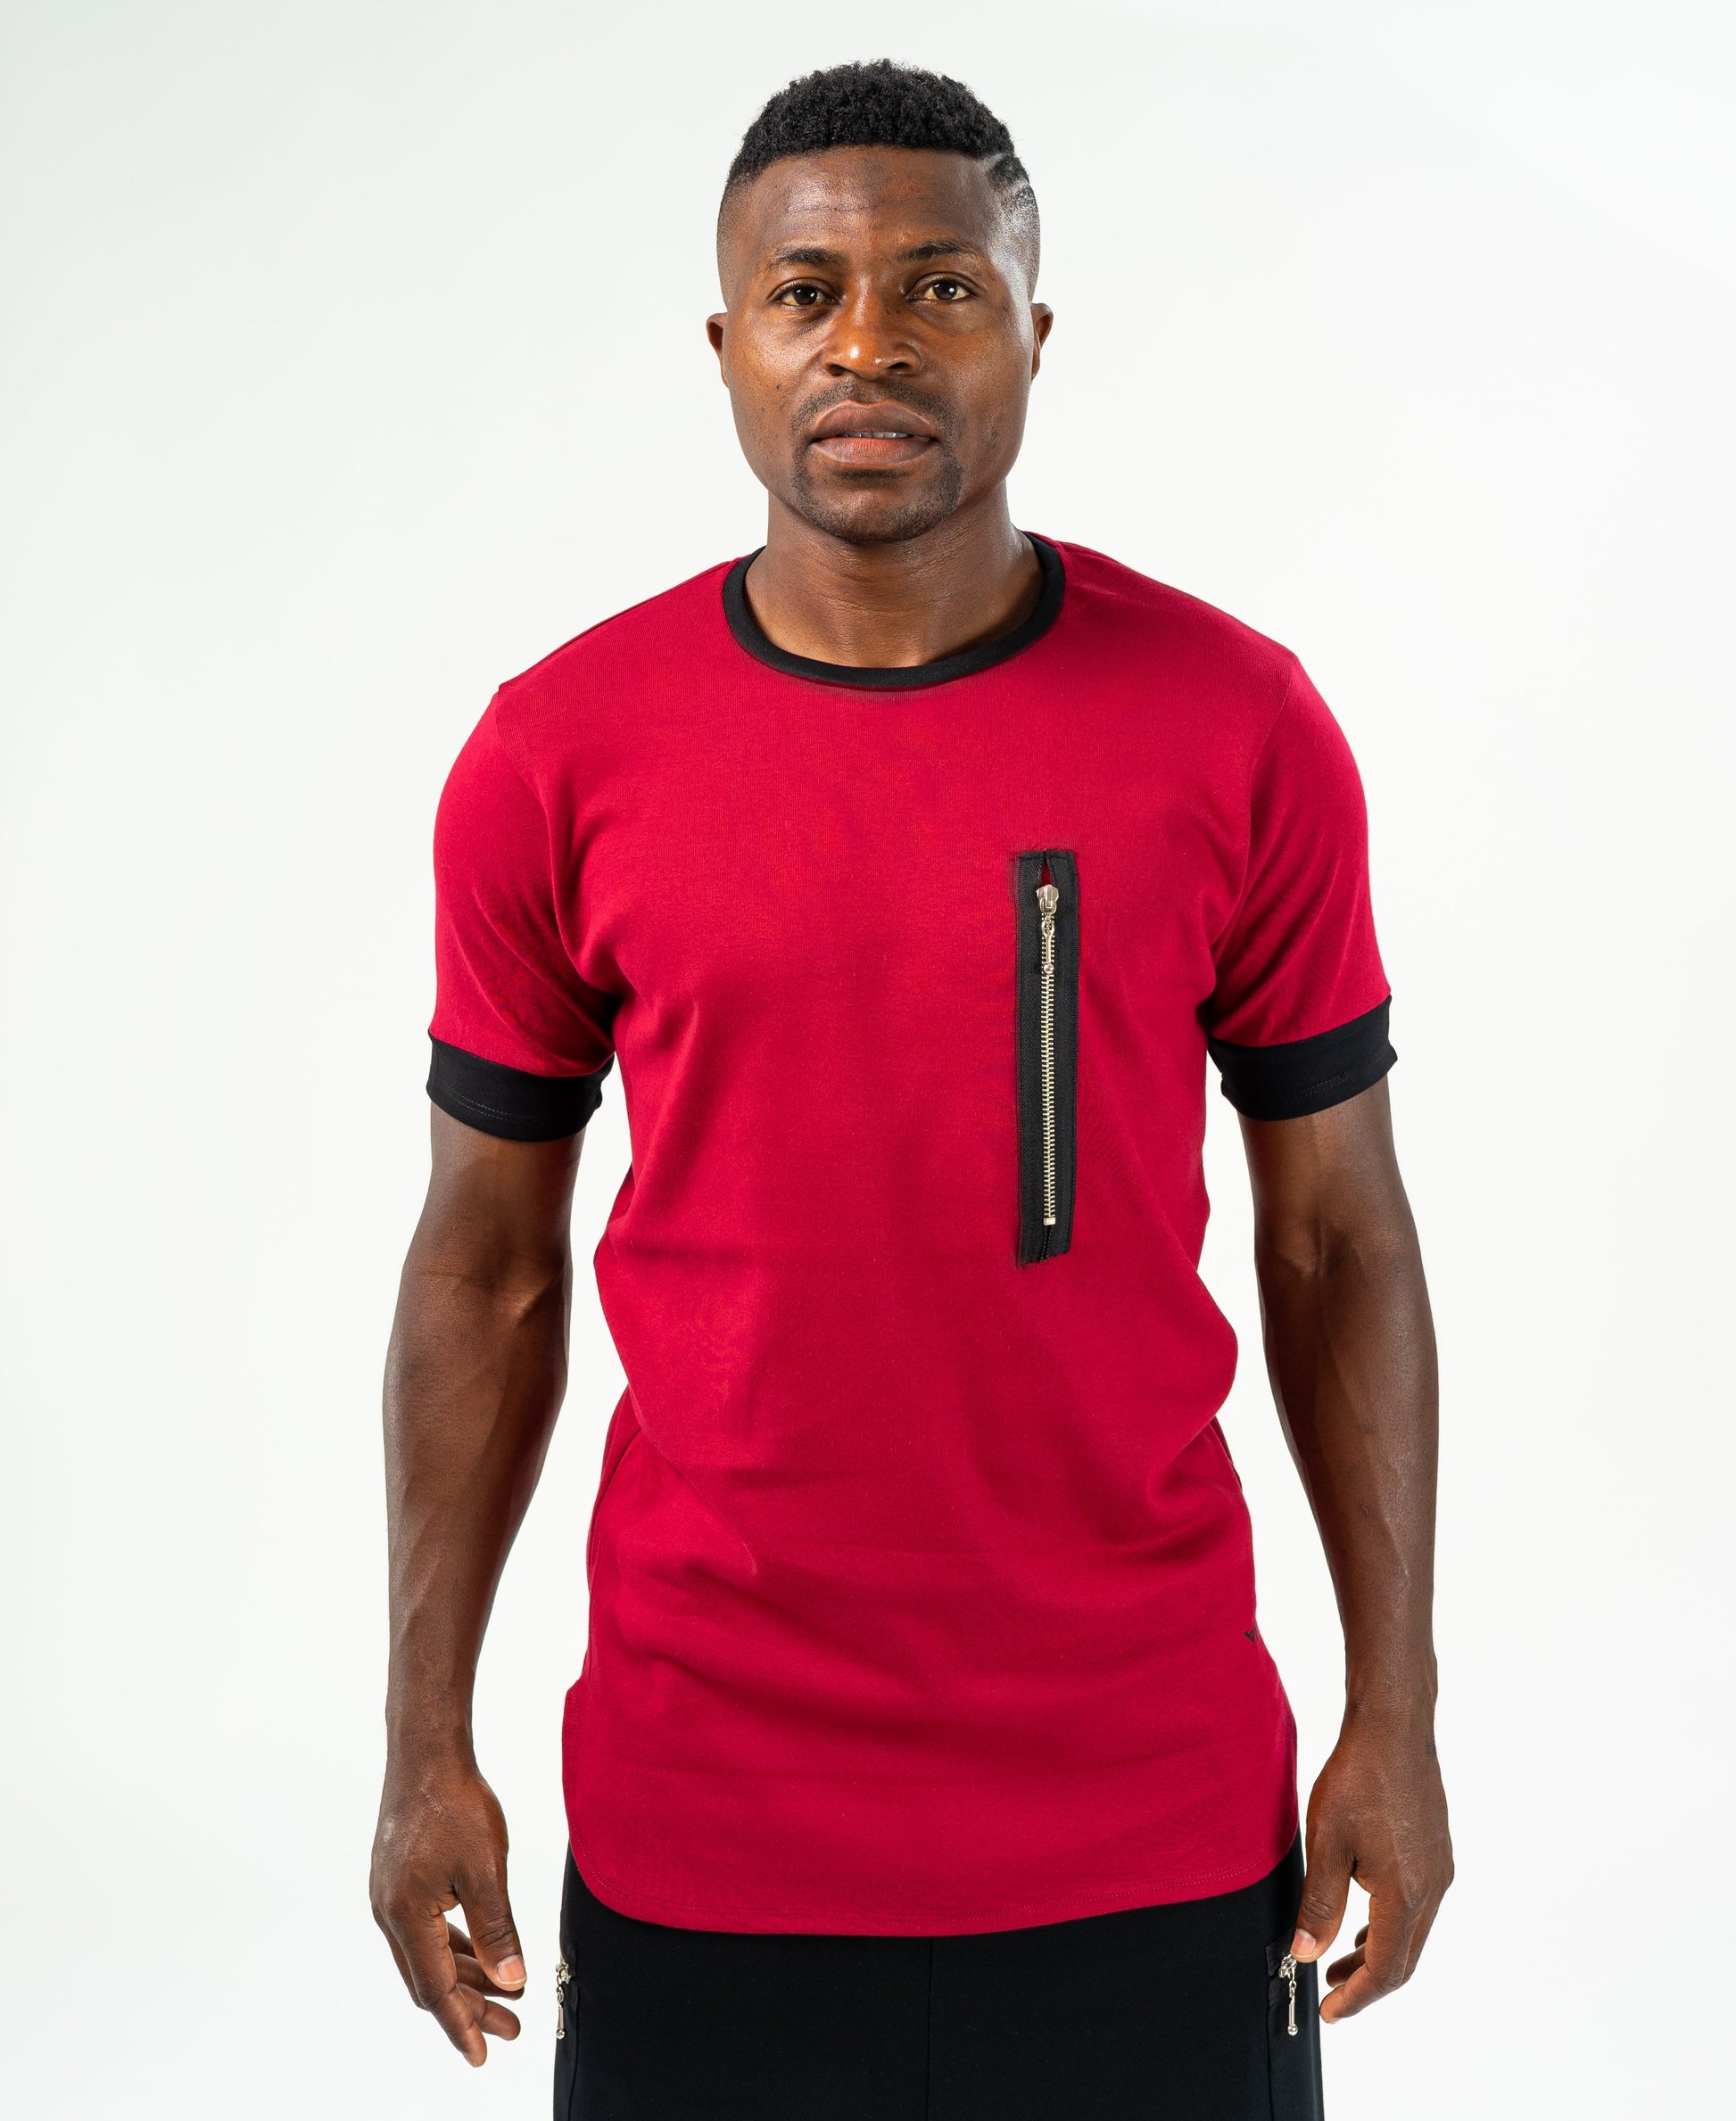 Burgundy t-shirt with black design and zip - Fatai Style